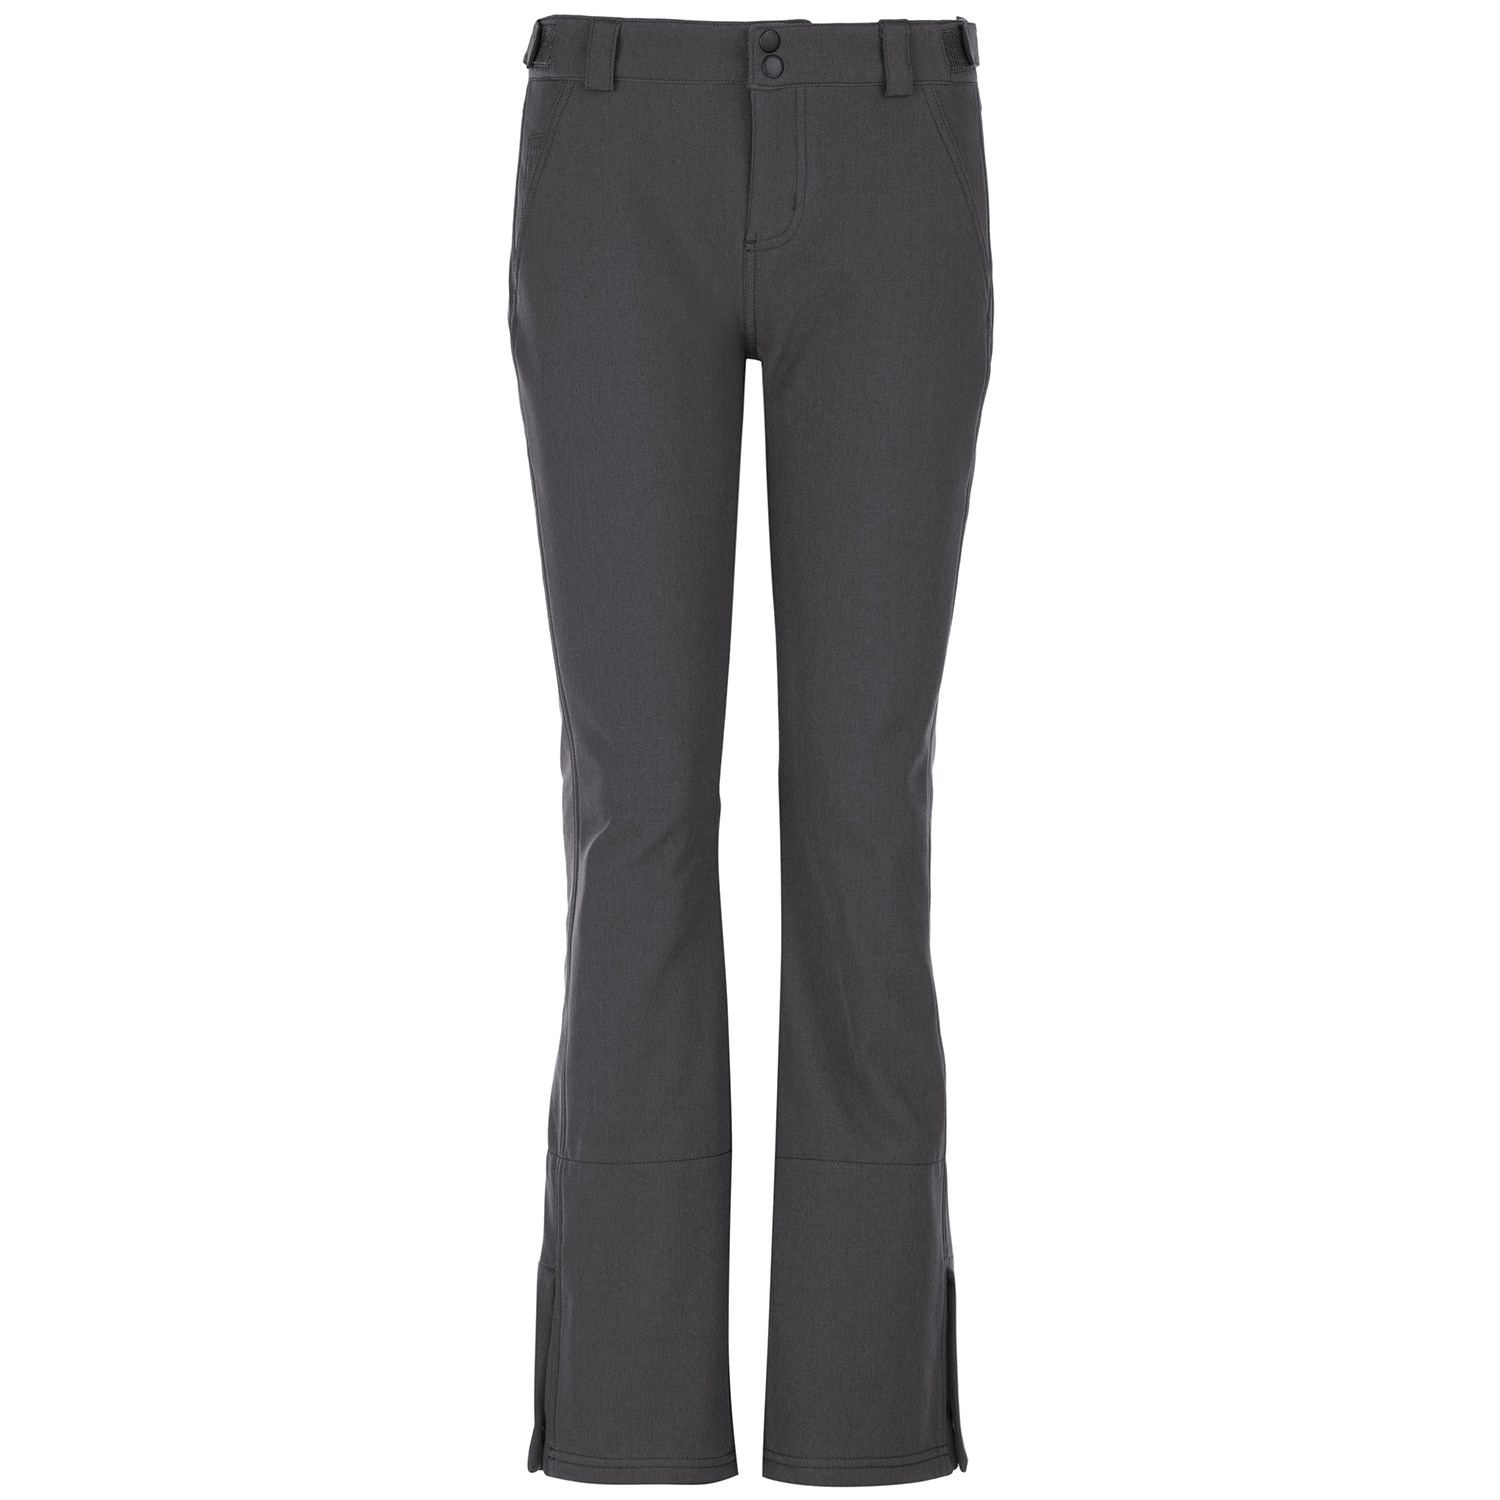 ONeill Womens Pw Spell Snow Pants